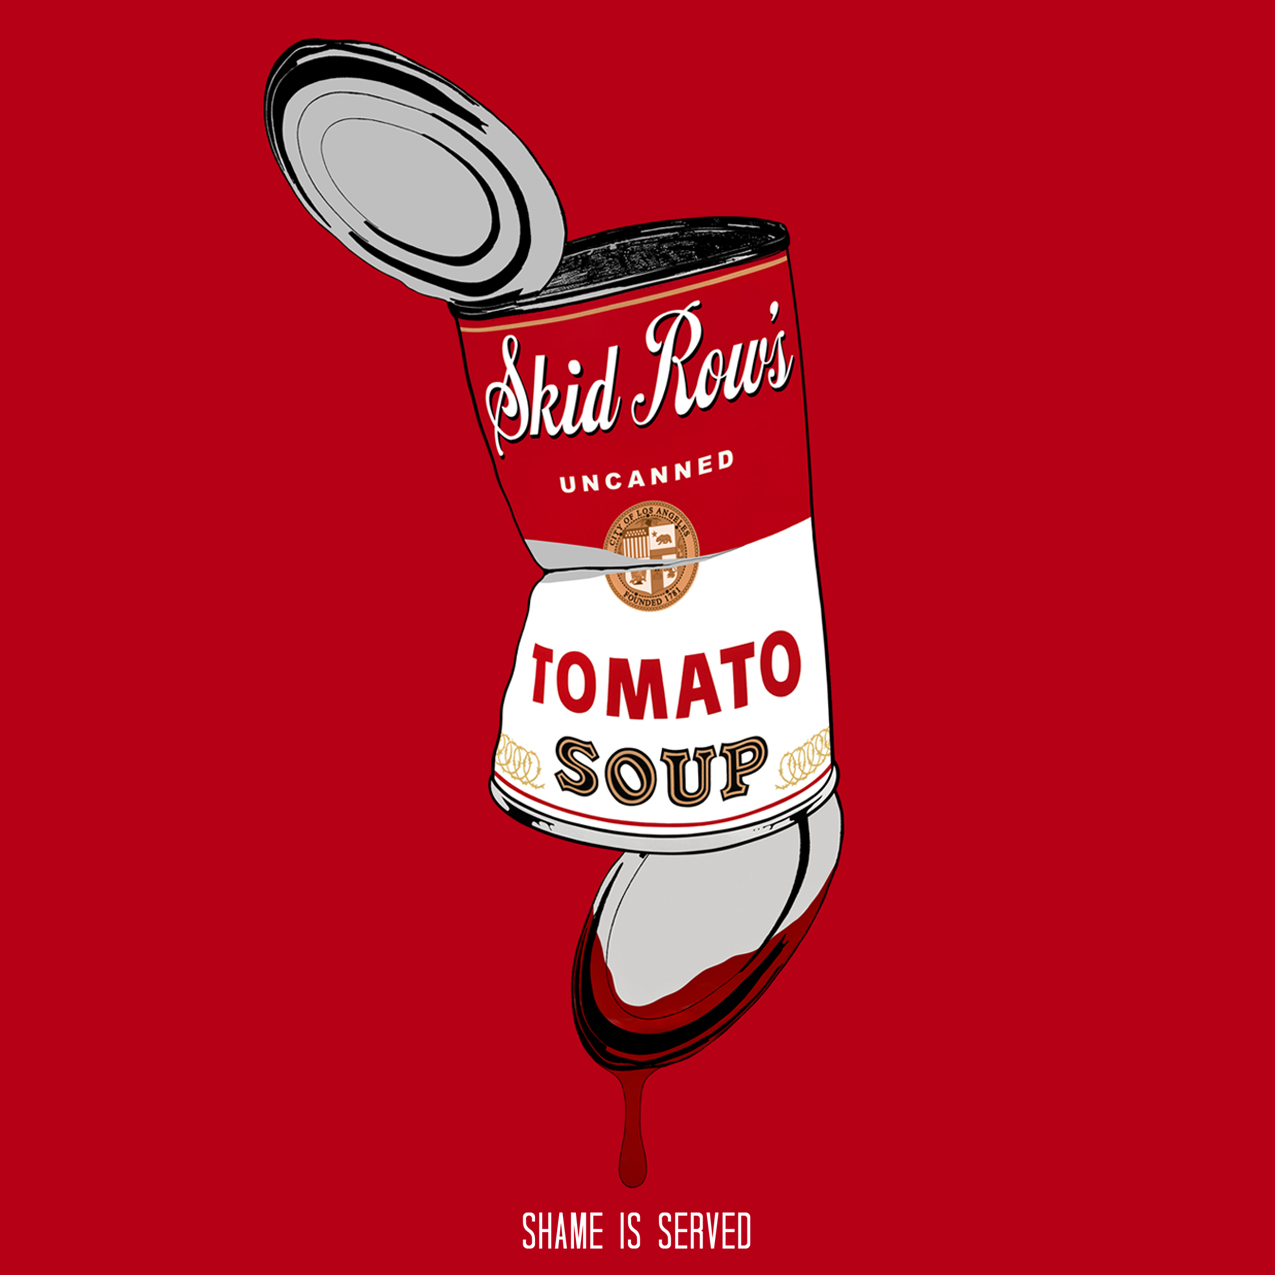 TOMATO SOUP IN SKID ROW